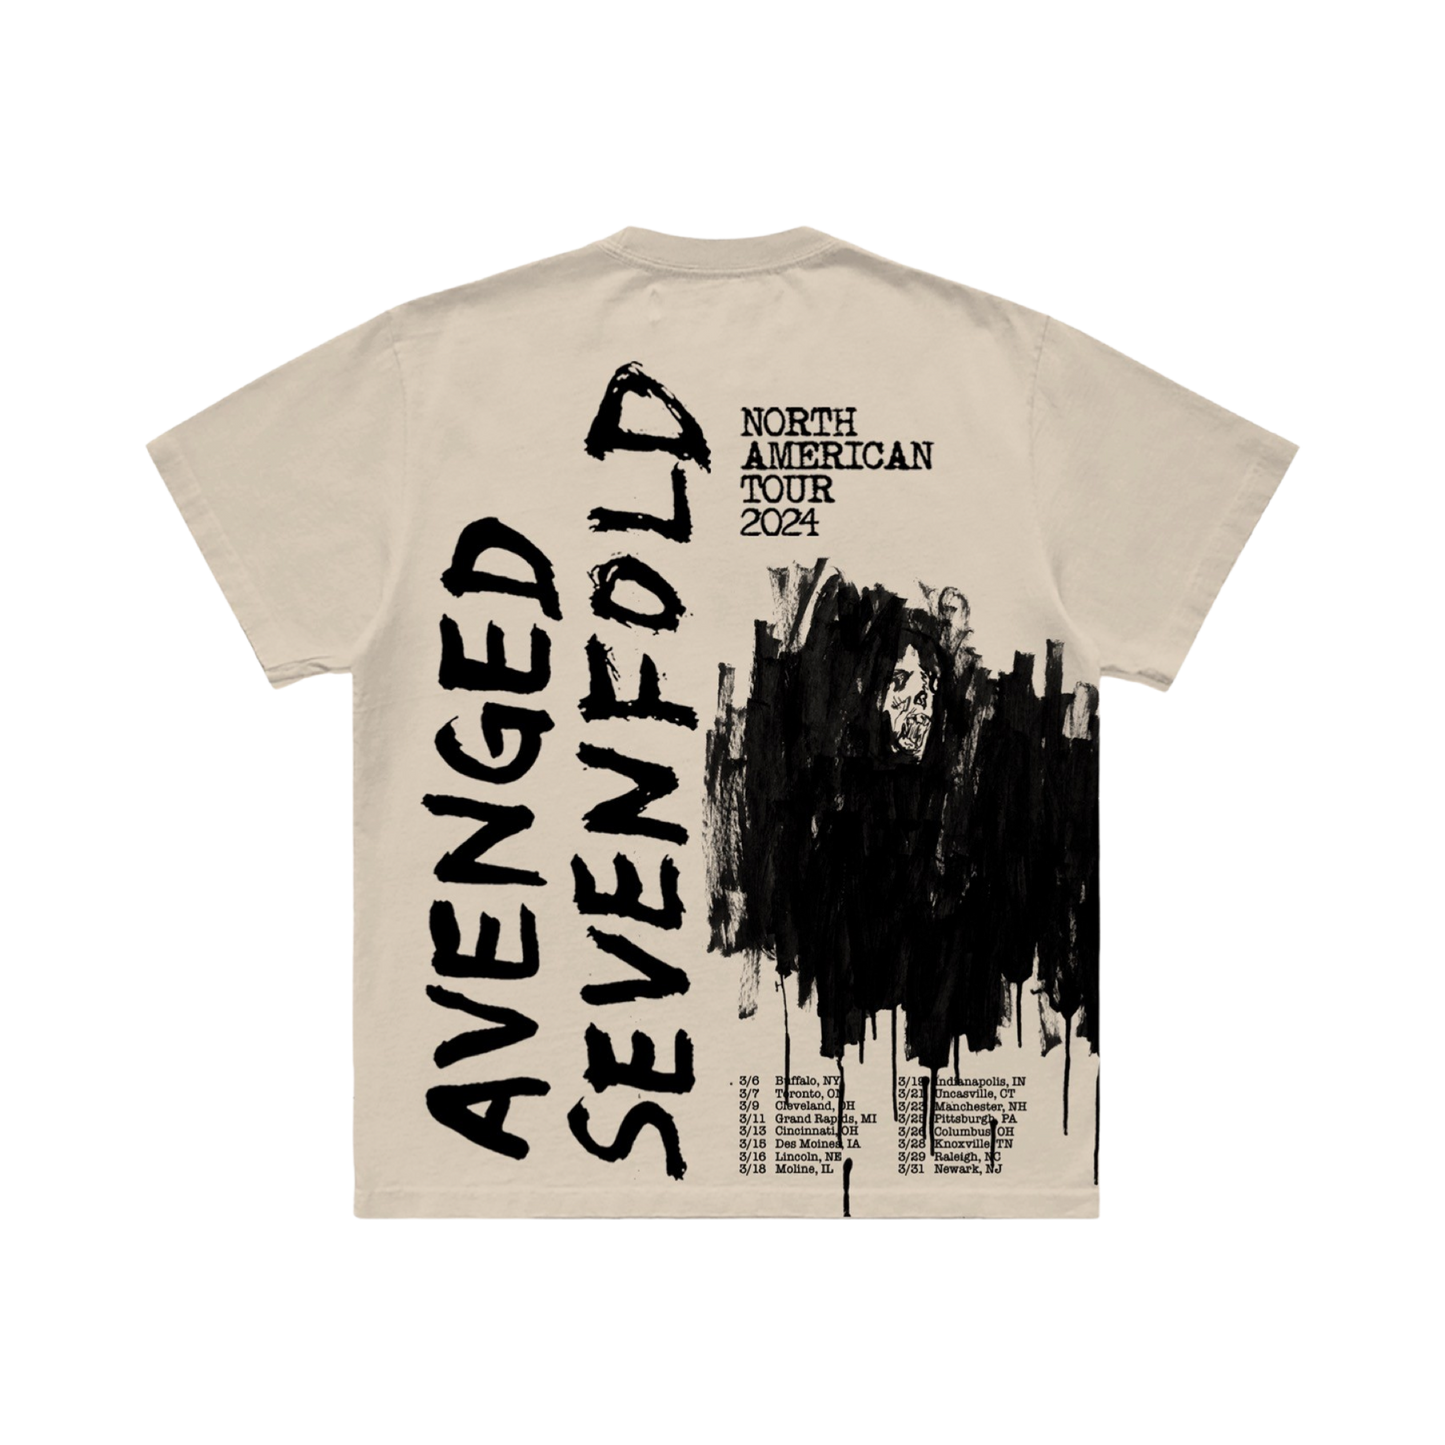 Avenged Sevenfold 2024 Tour He Who Cannot Be Named - Tee